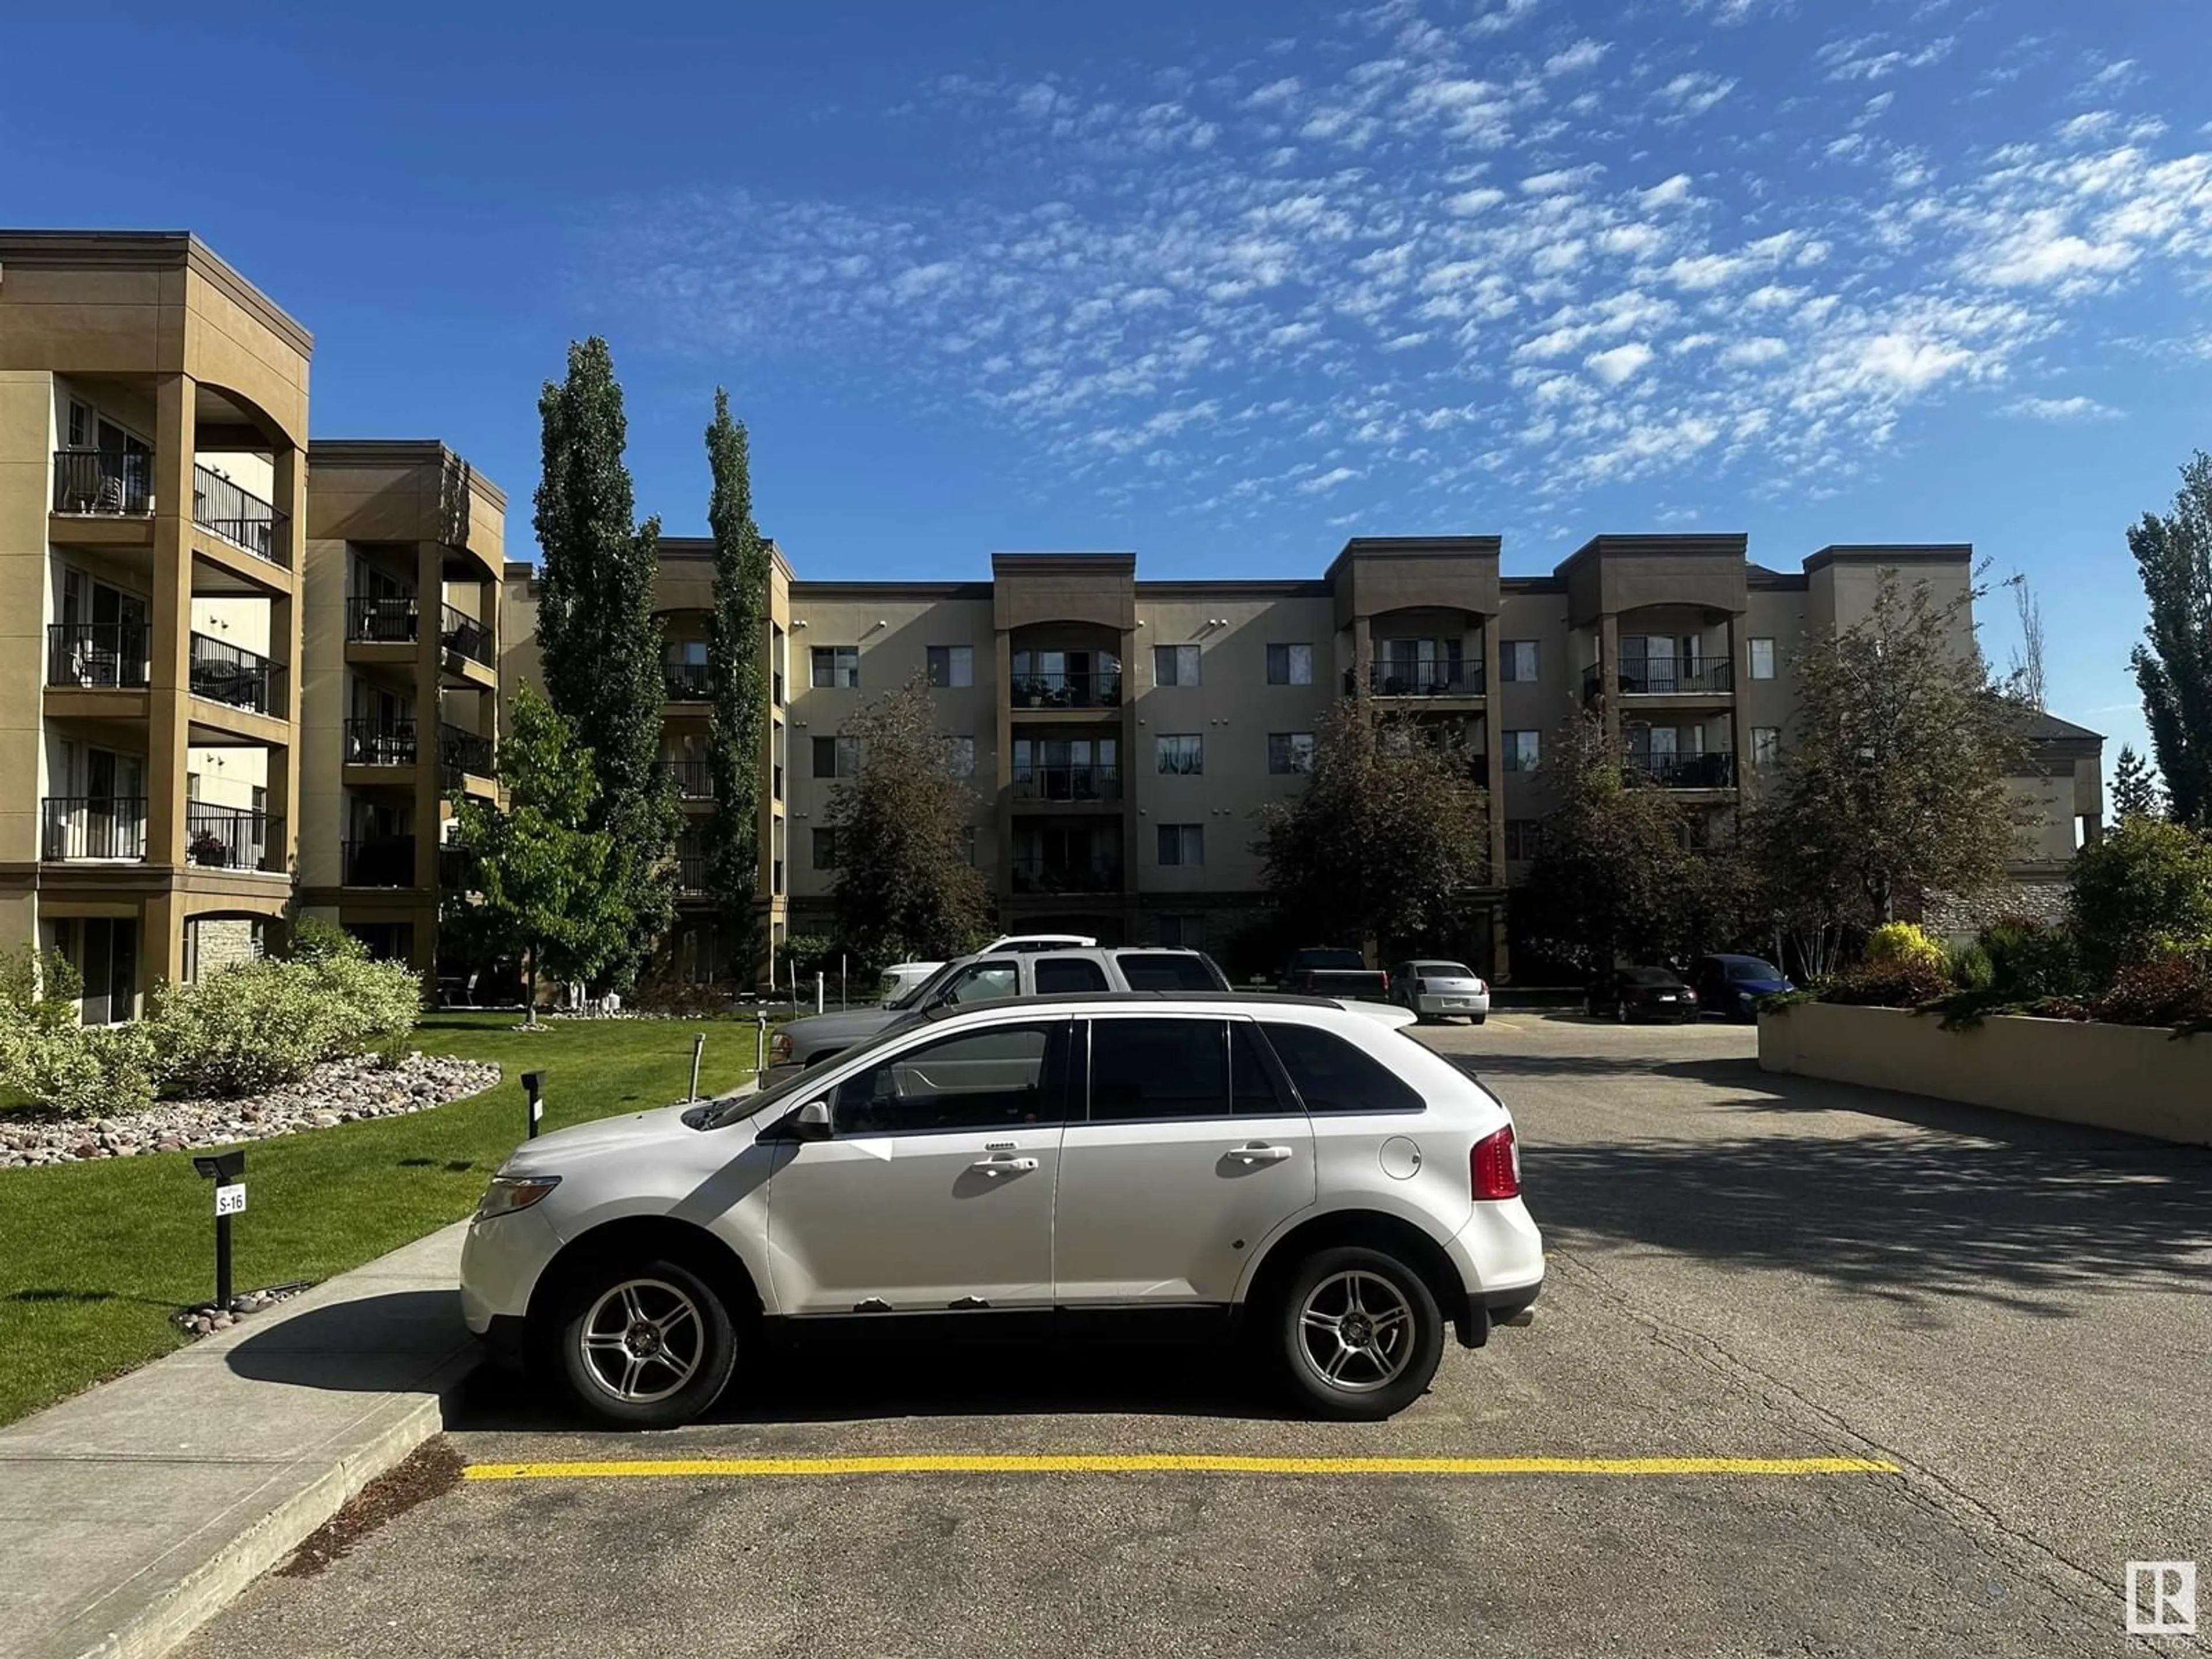 A pic from exterior of the house or condo for #323 400 Palisades WY, Sherwood Park Alberta T8H0H4